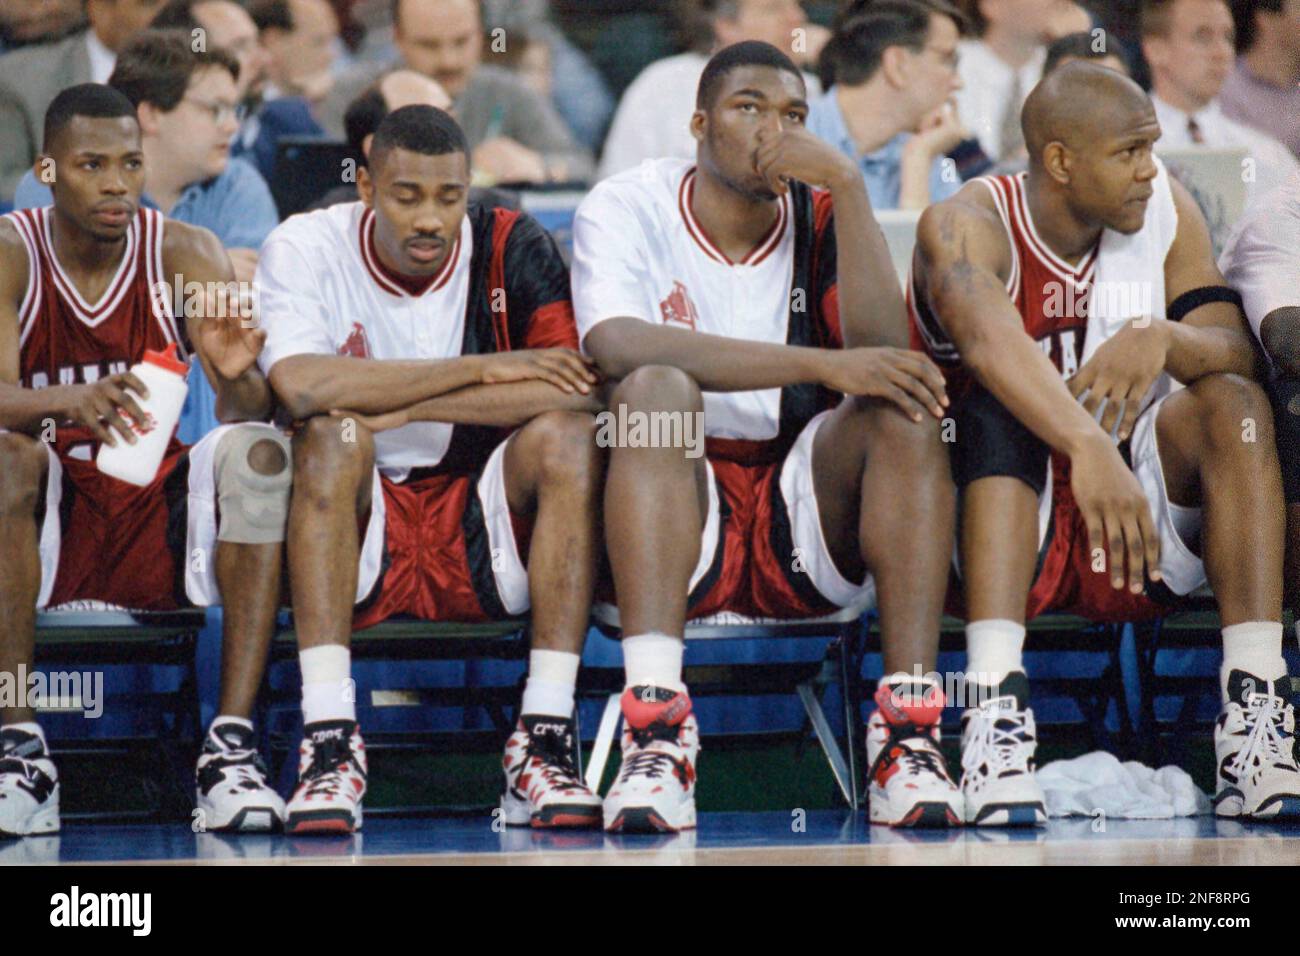 Arkansas players Alex Dillard, left, Darnell Robinson, center, and Corliss Williamson sit on the bench in the closing minutes of their loss to UCLA at the NCAA Championship game at the Seattle Kingdome, April 3, 1995. UCLA won the title with a 89-78 victory. (AP Photo/Eric Draper) Stock Photo